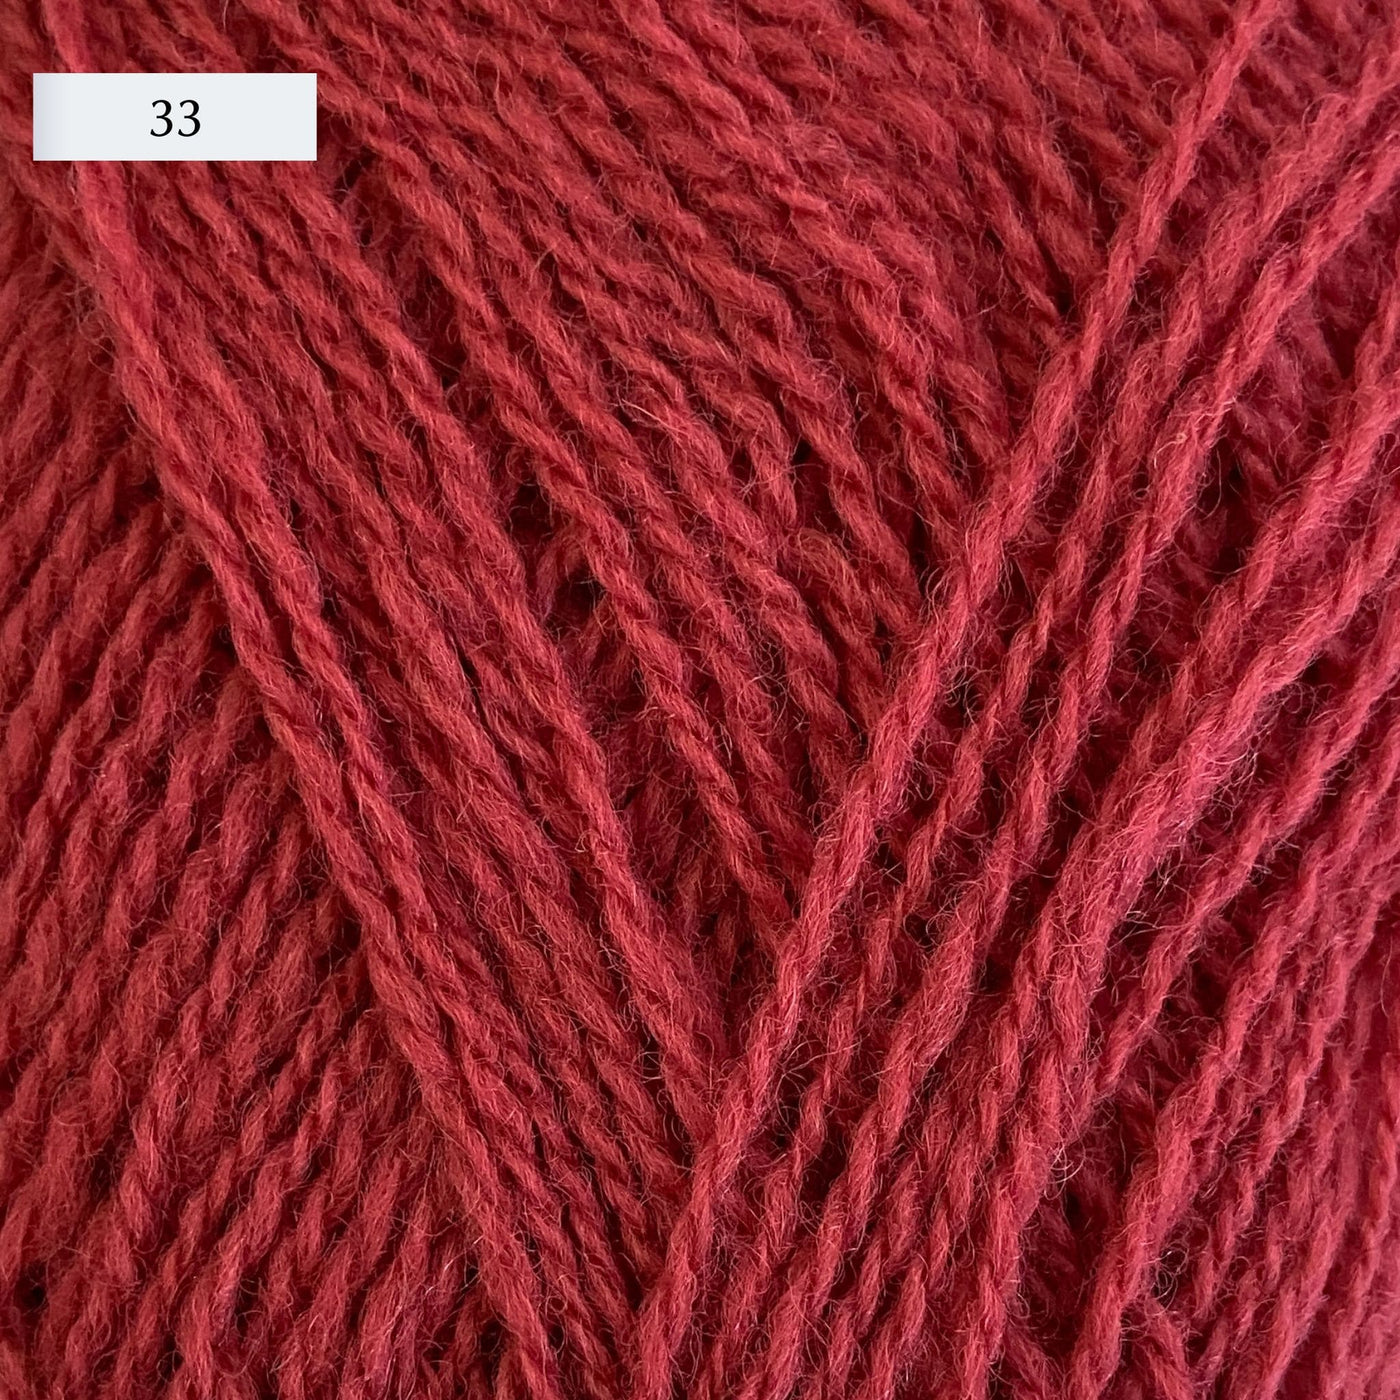 Rauma Lamullgarn, a fingering weight yarn, in color 33, a saturated red-coral